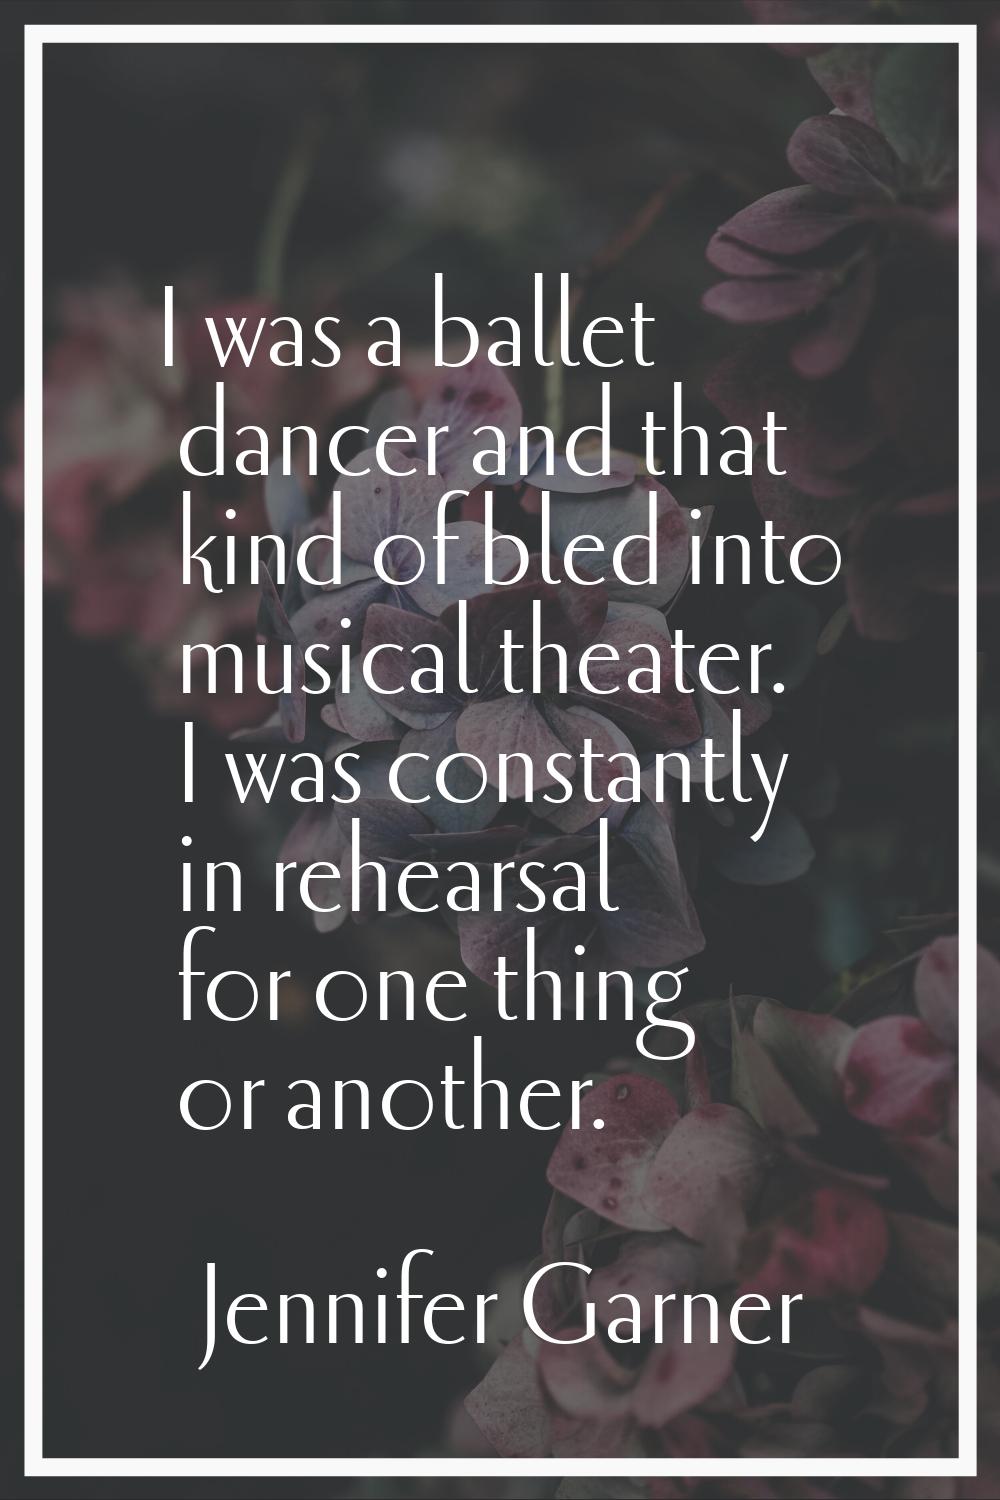 I was a ballet dancer and that kind of bled into musical theater. I was constantly in rehearsal for